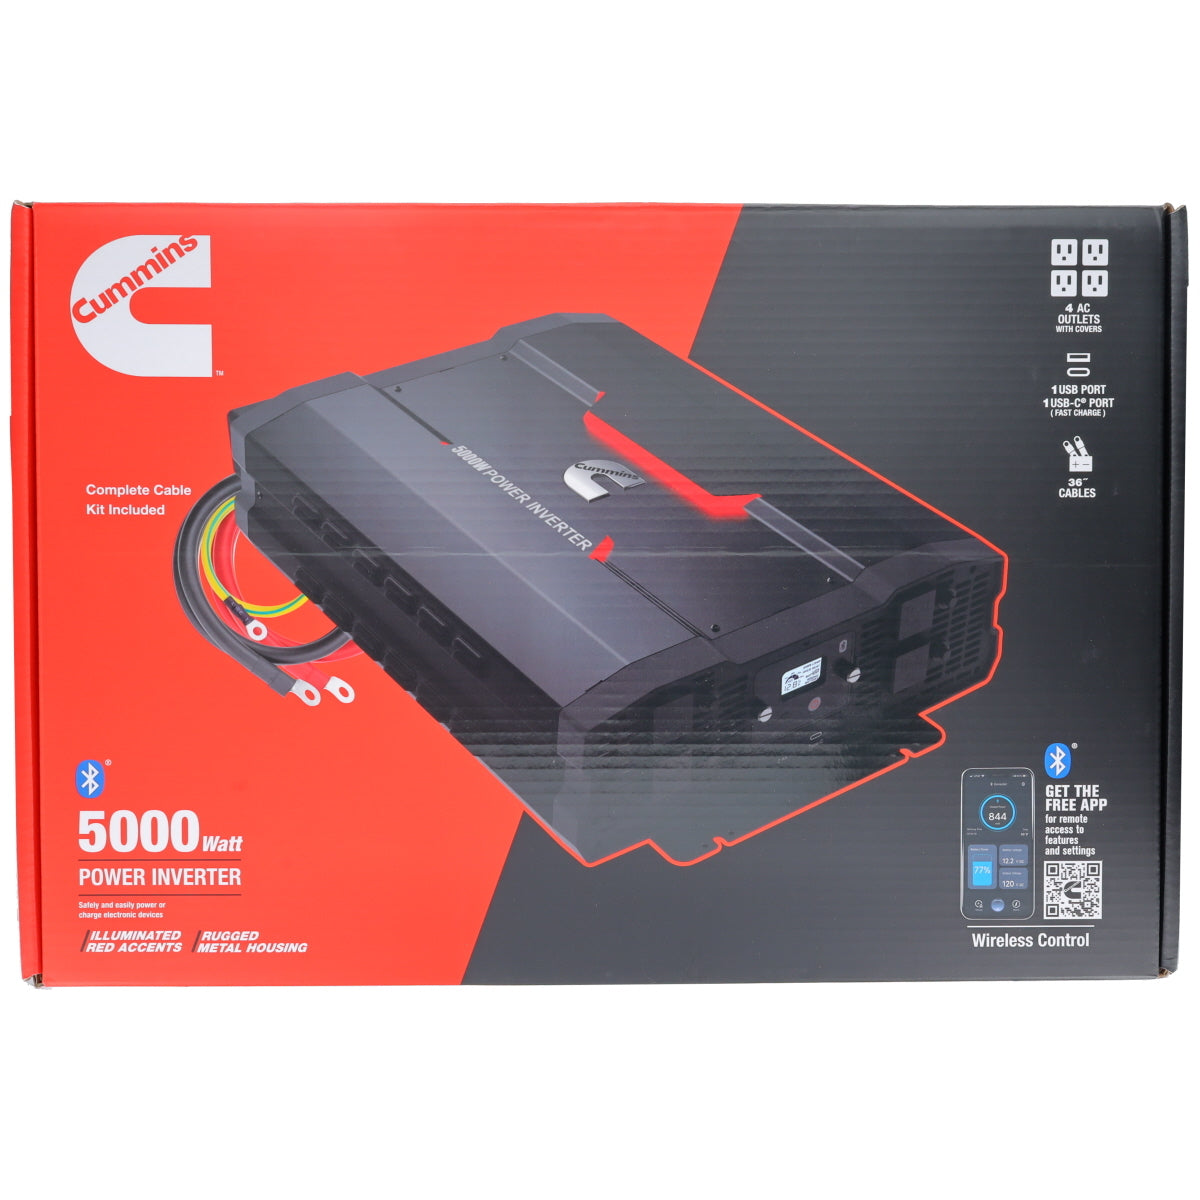 Cummins 5000 Watt Power Inverter Modified Sine Wave Truck Inverter 12V to 110 Volts Four AC Outlets Two USB Ports (Full Cable Kit Included) CMN5000W